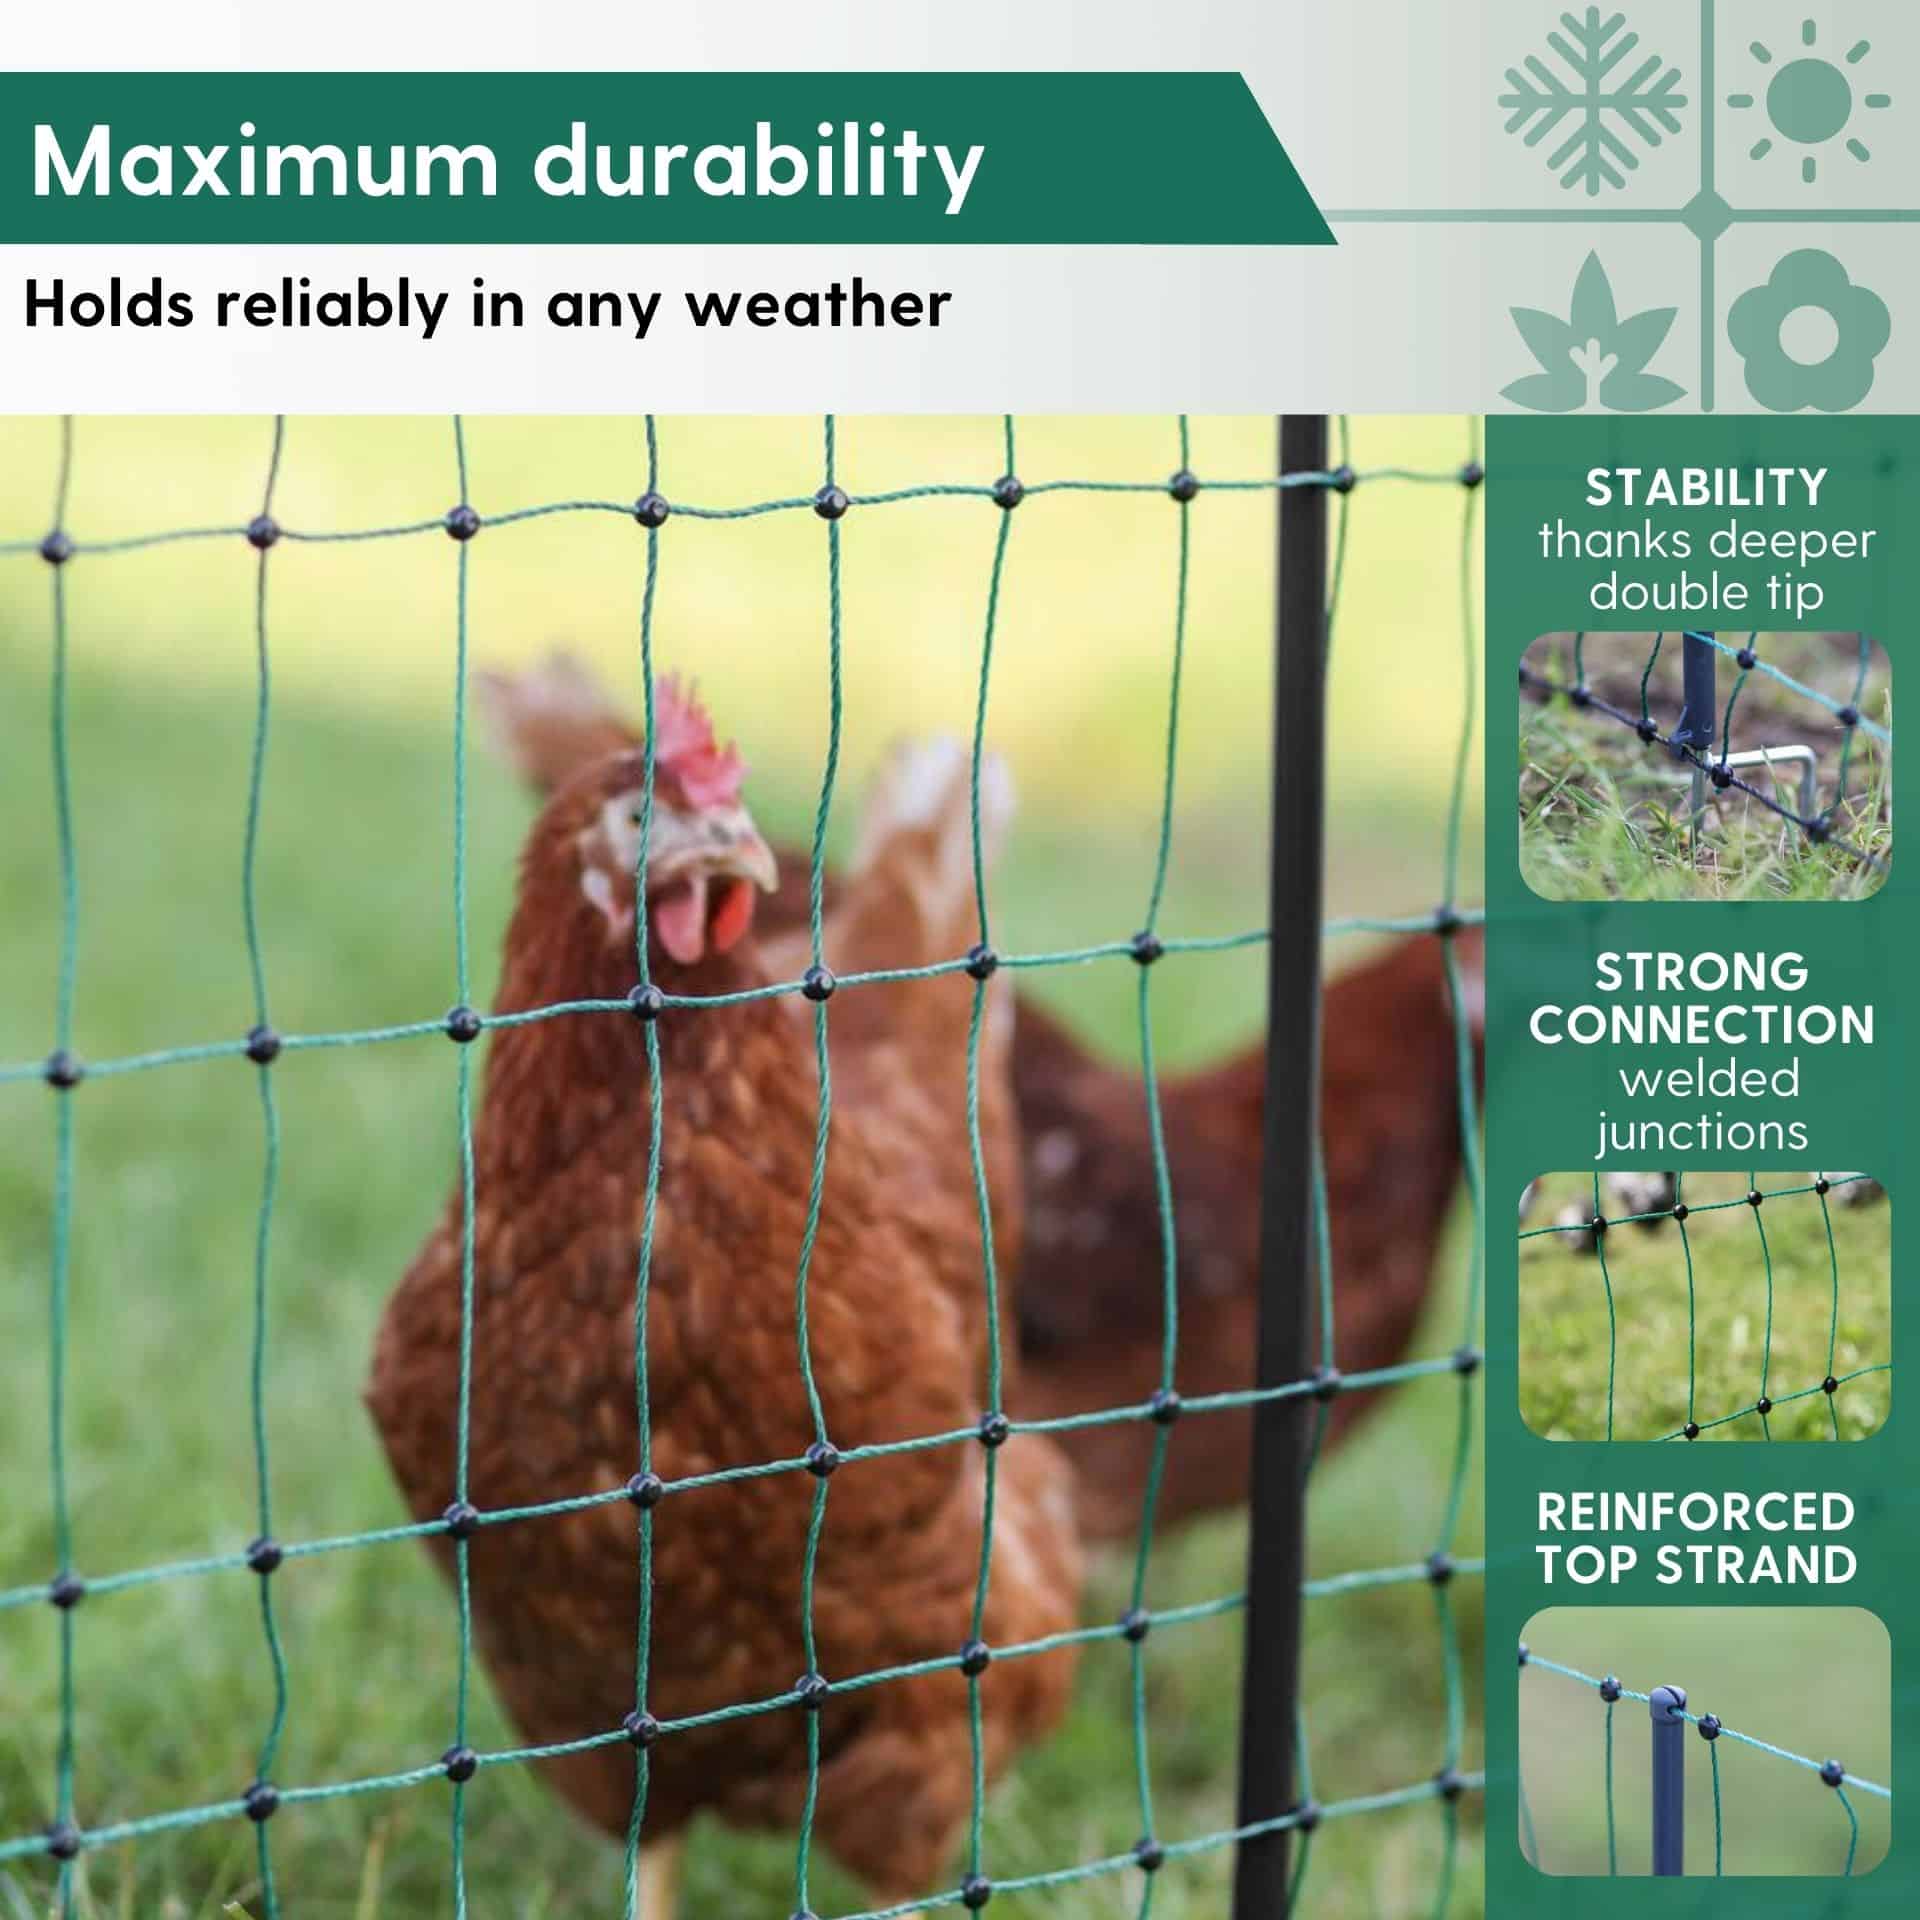 Agrarzone Poultry Net Classic electrificable, double tip, green 25 m x 106 cm